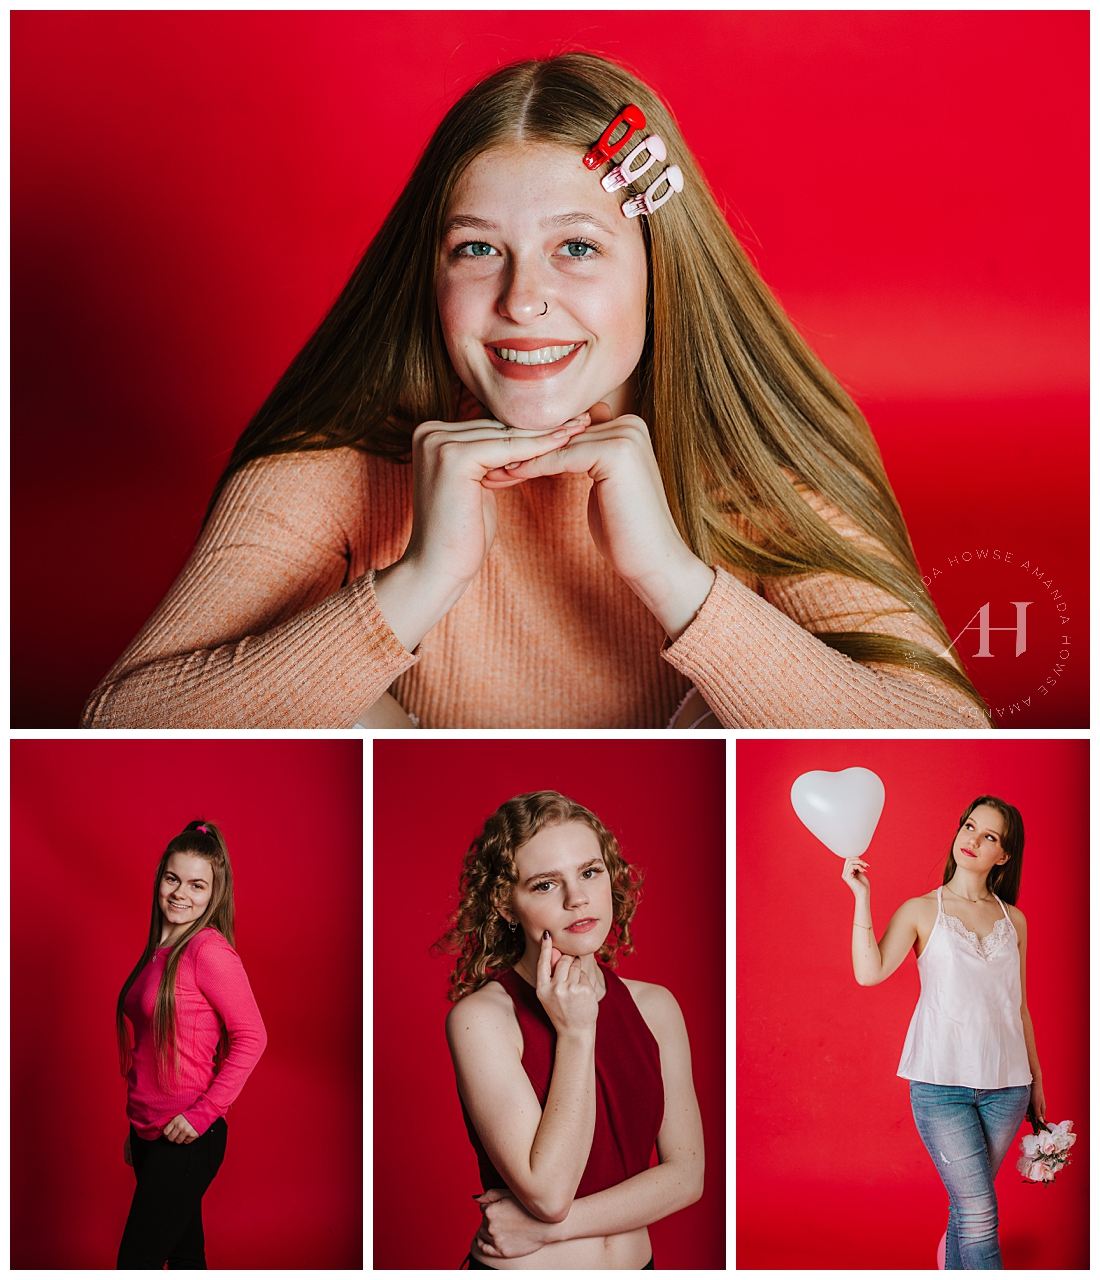 Accessories for Valentine's Day Portraits | How to Style Outfits for Hearts Themed Photoshoot, Pose Ideas for Girls, High School Senior Portraits at Studio 253 | Photographed by Tacoma Senior Photographer Amanda Howse 